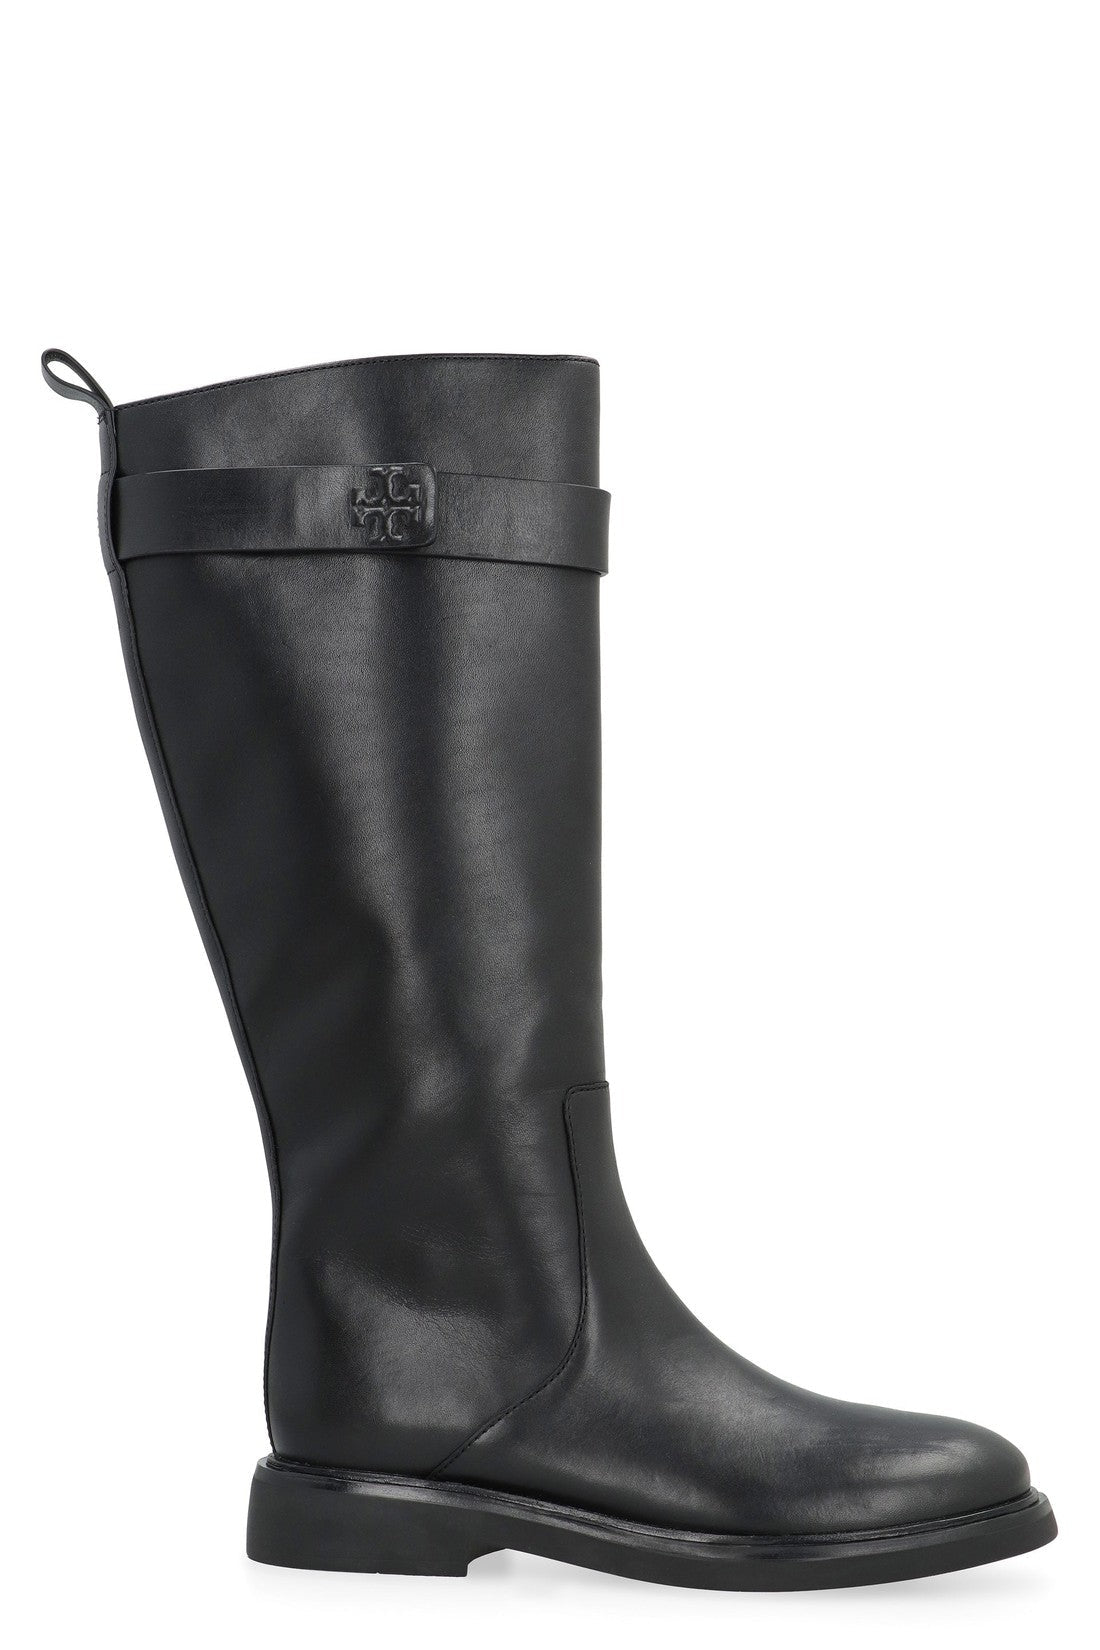 Tory Burch-OUTLET-SALE-Leather boots-ARCHIVIST